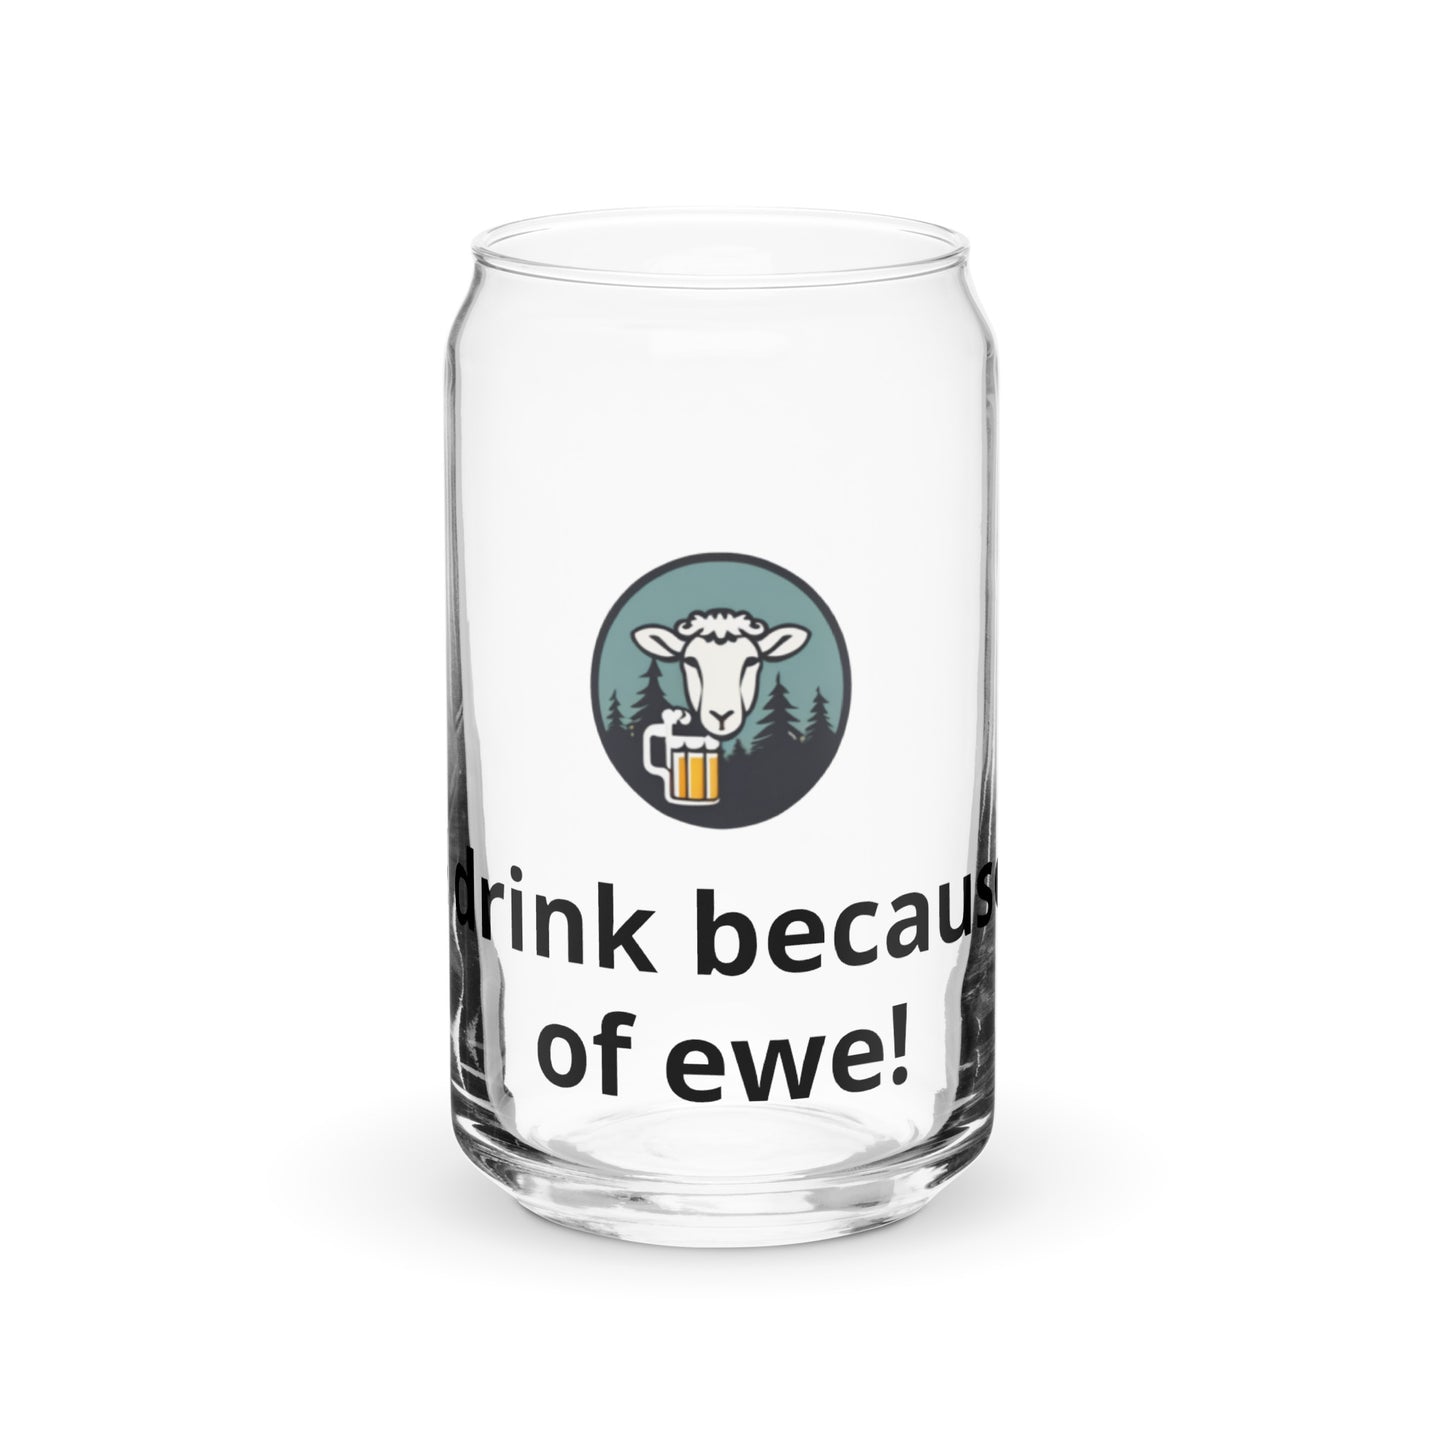 I drink because of ewe - Can-shaped glass